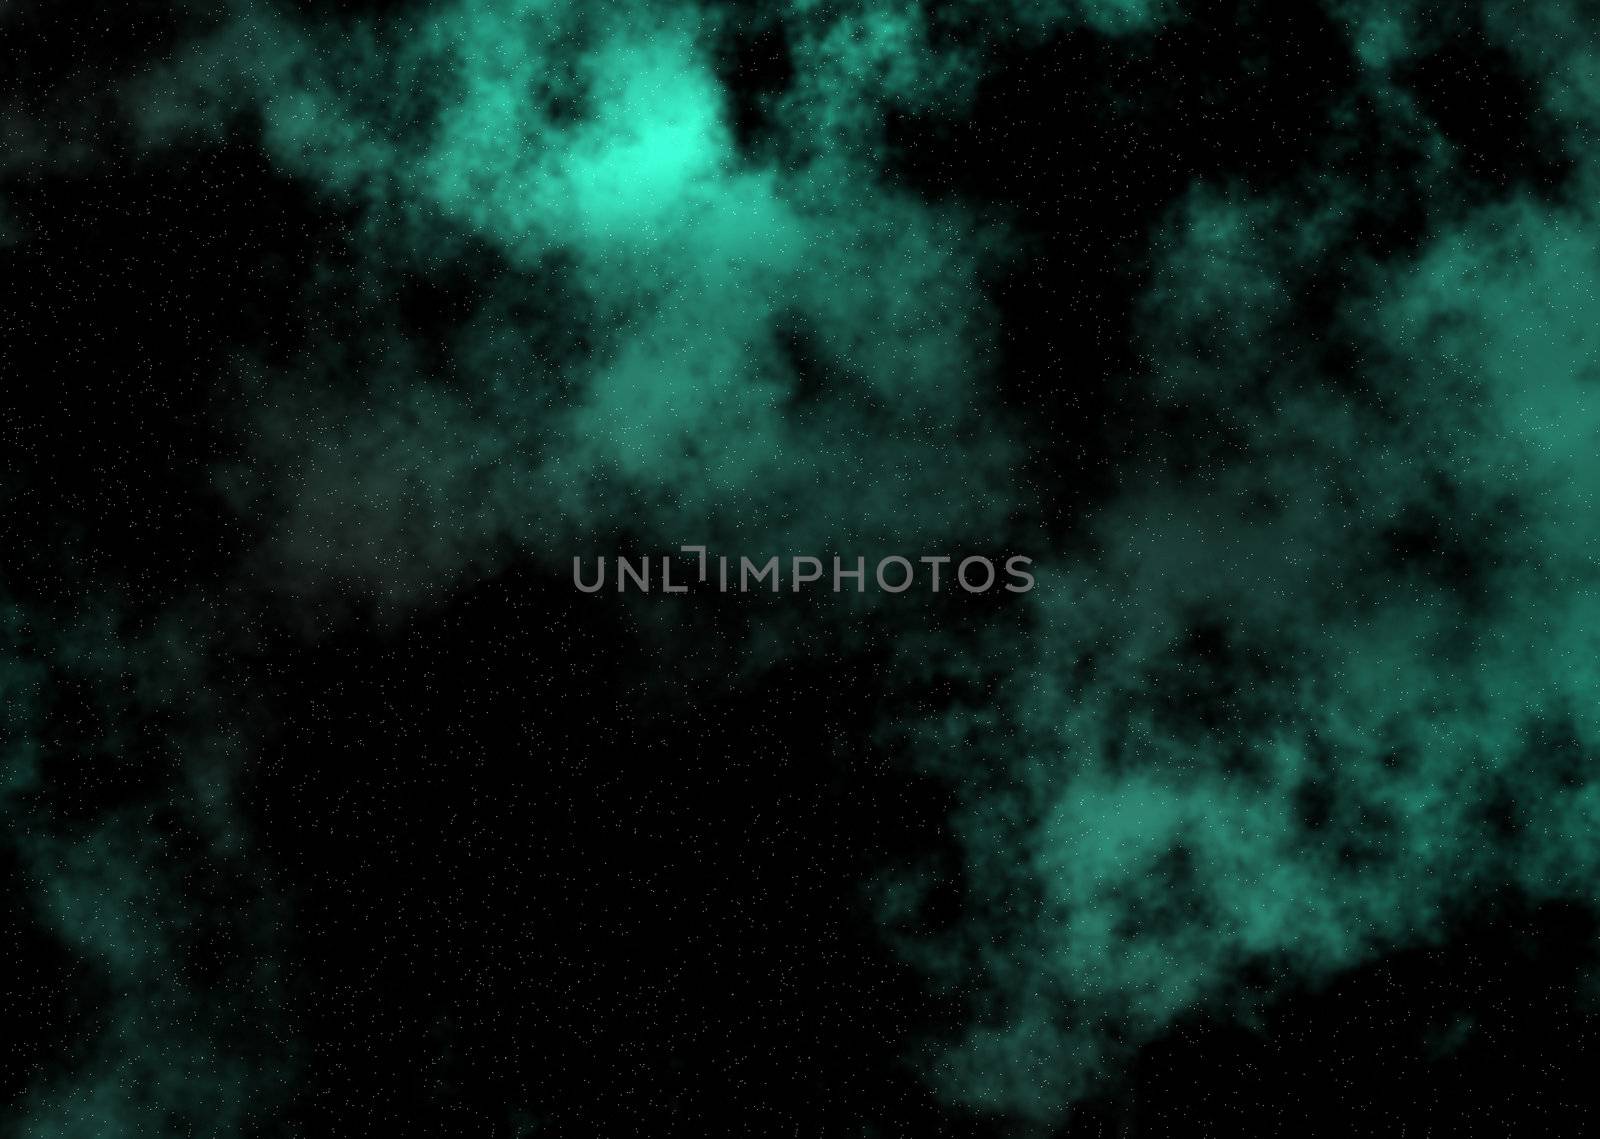 Space background image with jade clouds drifting across the sky